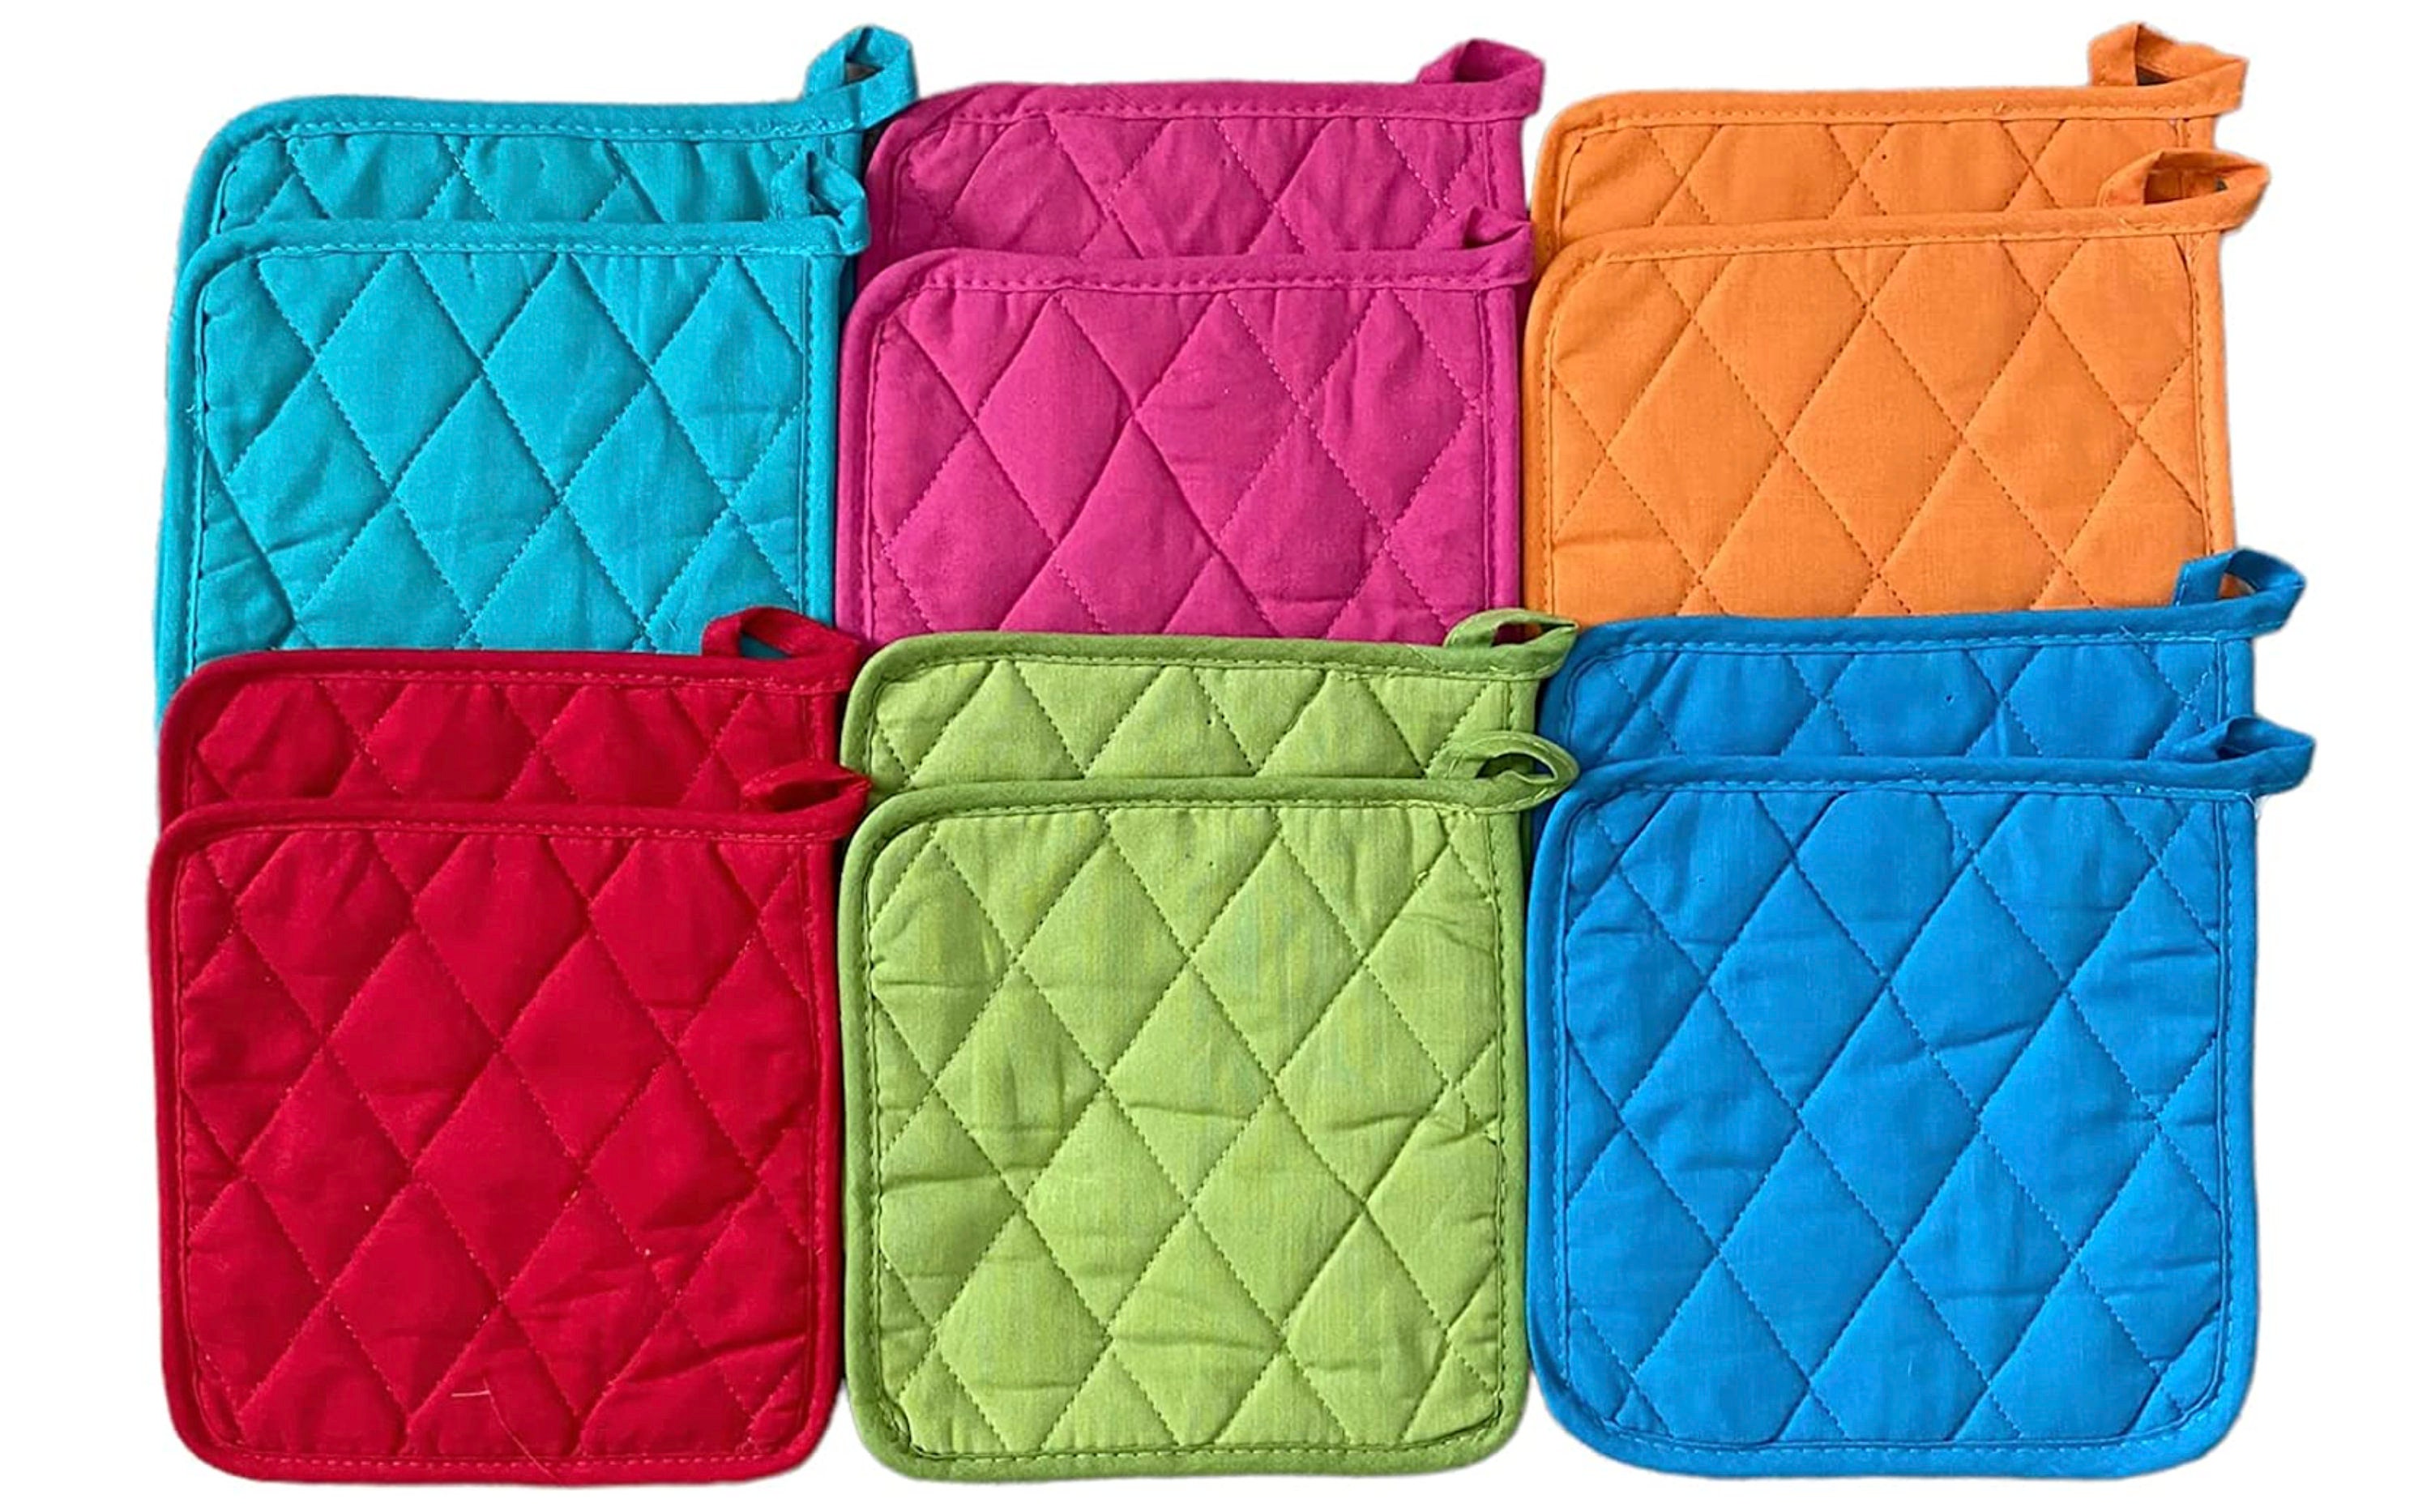 Zulay Kitchen Pot Holder - Quilted Terry Cloth Potholders 7x7 Inch (Black),  1 - Foods Co.